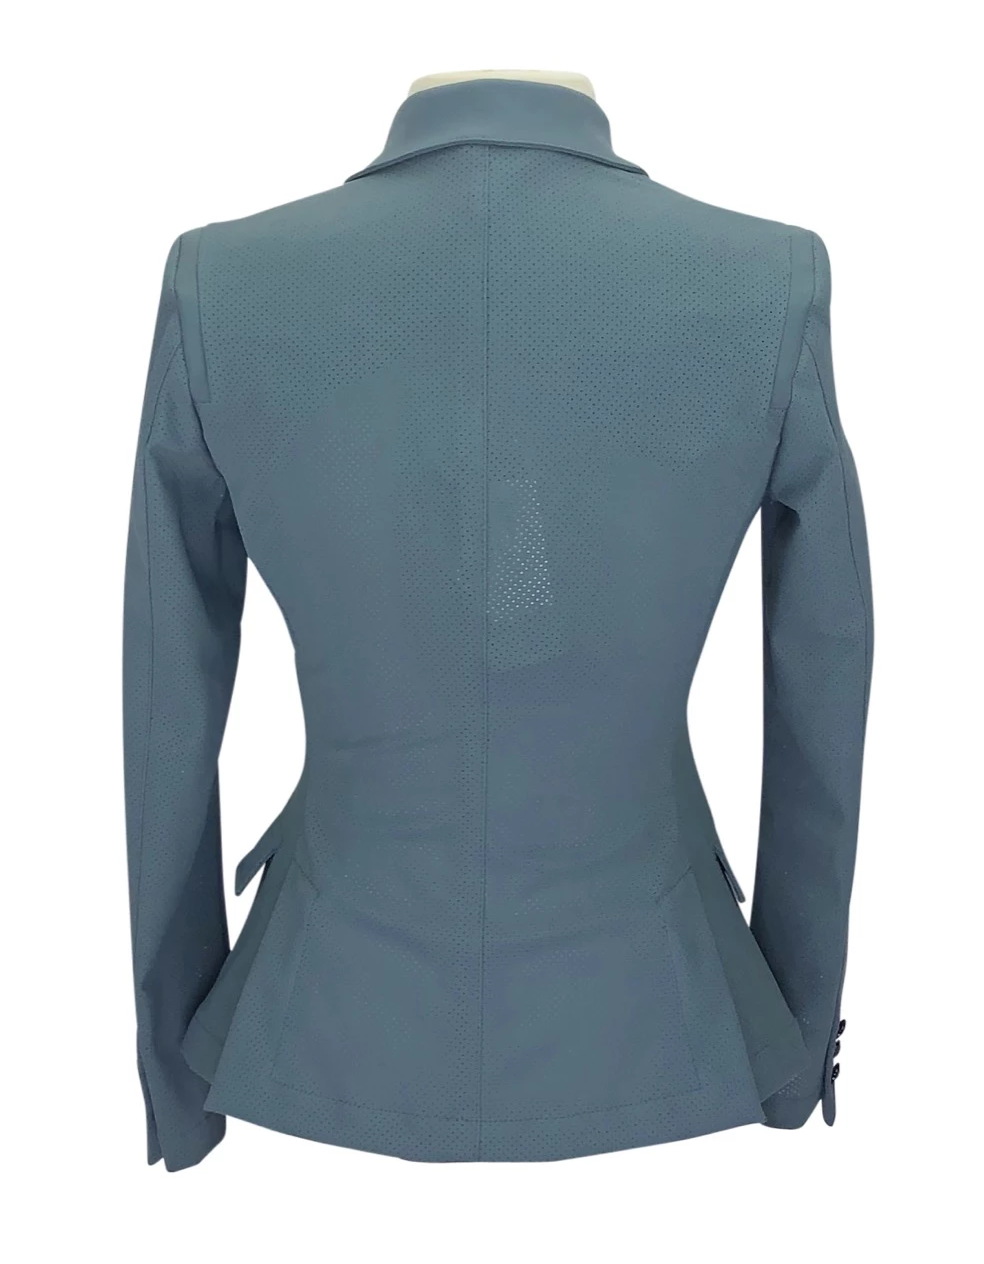 Back of Cavalleria Toscana All Over Perforated Jacket in Dark Sea Foam